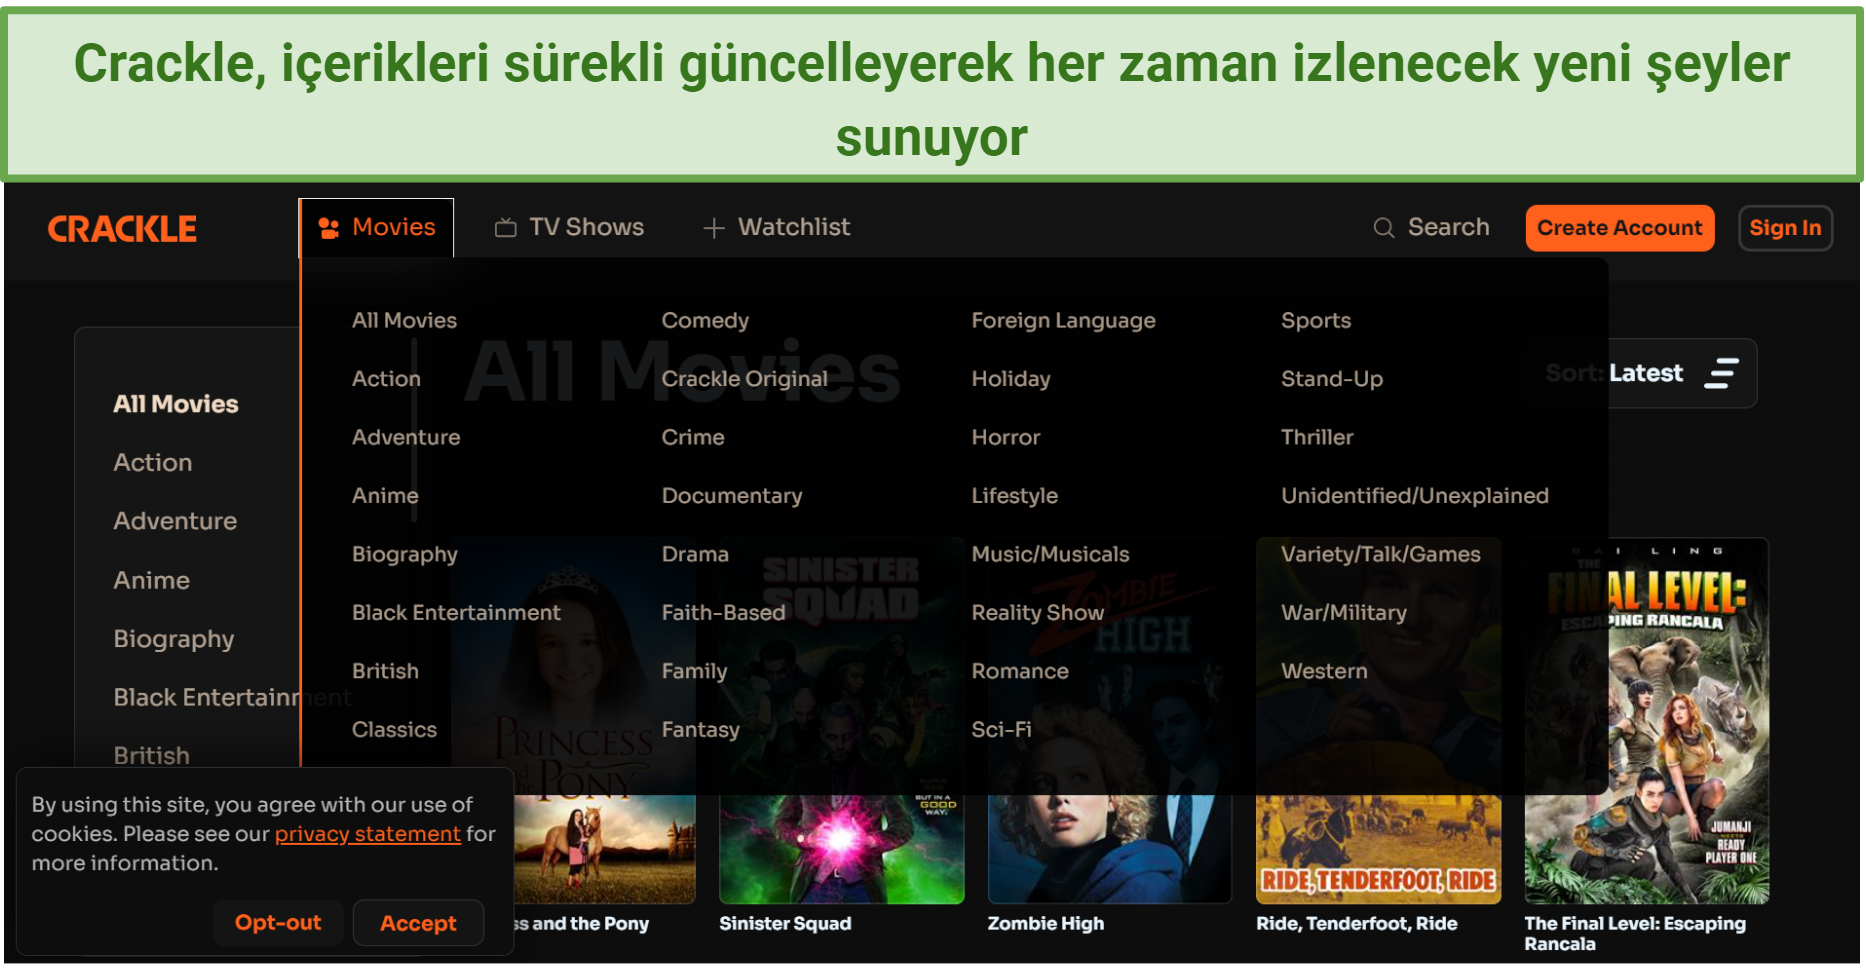 Screenshot of Crackle's interface showing all the content categories.